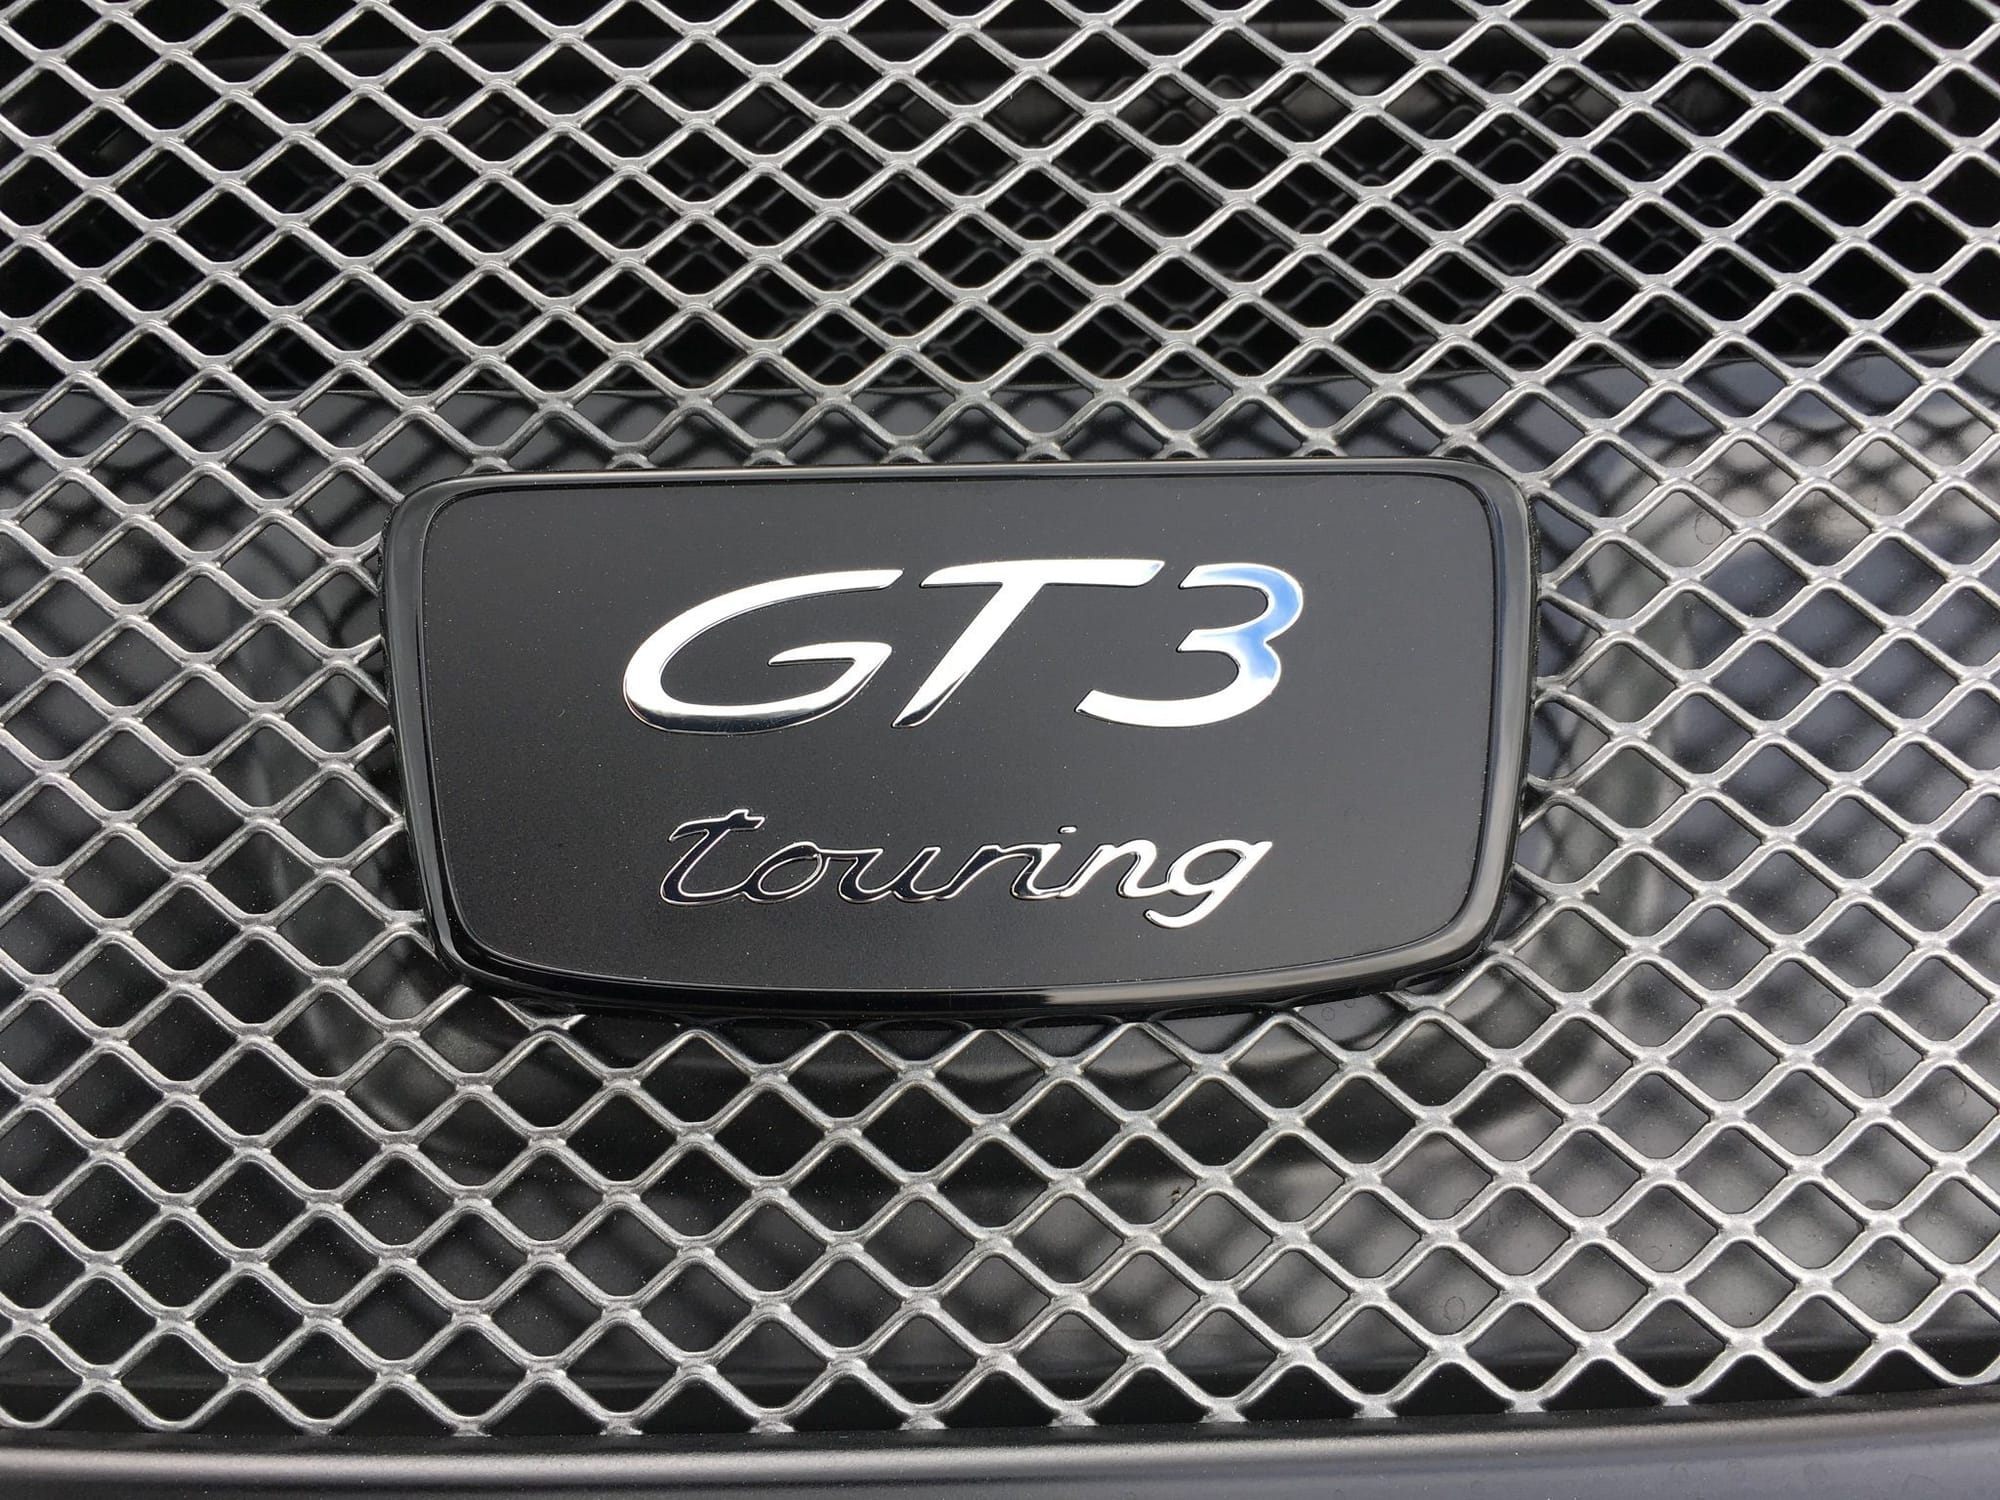 2018 - 2019 Porsche GT3 - WTB: 991.2 GT3 Touring - Used - Orange County, CA 92603, United States